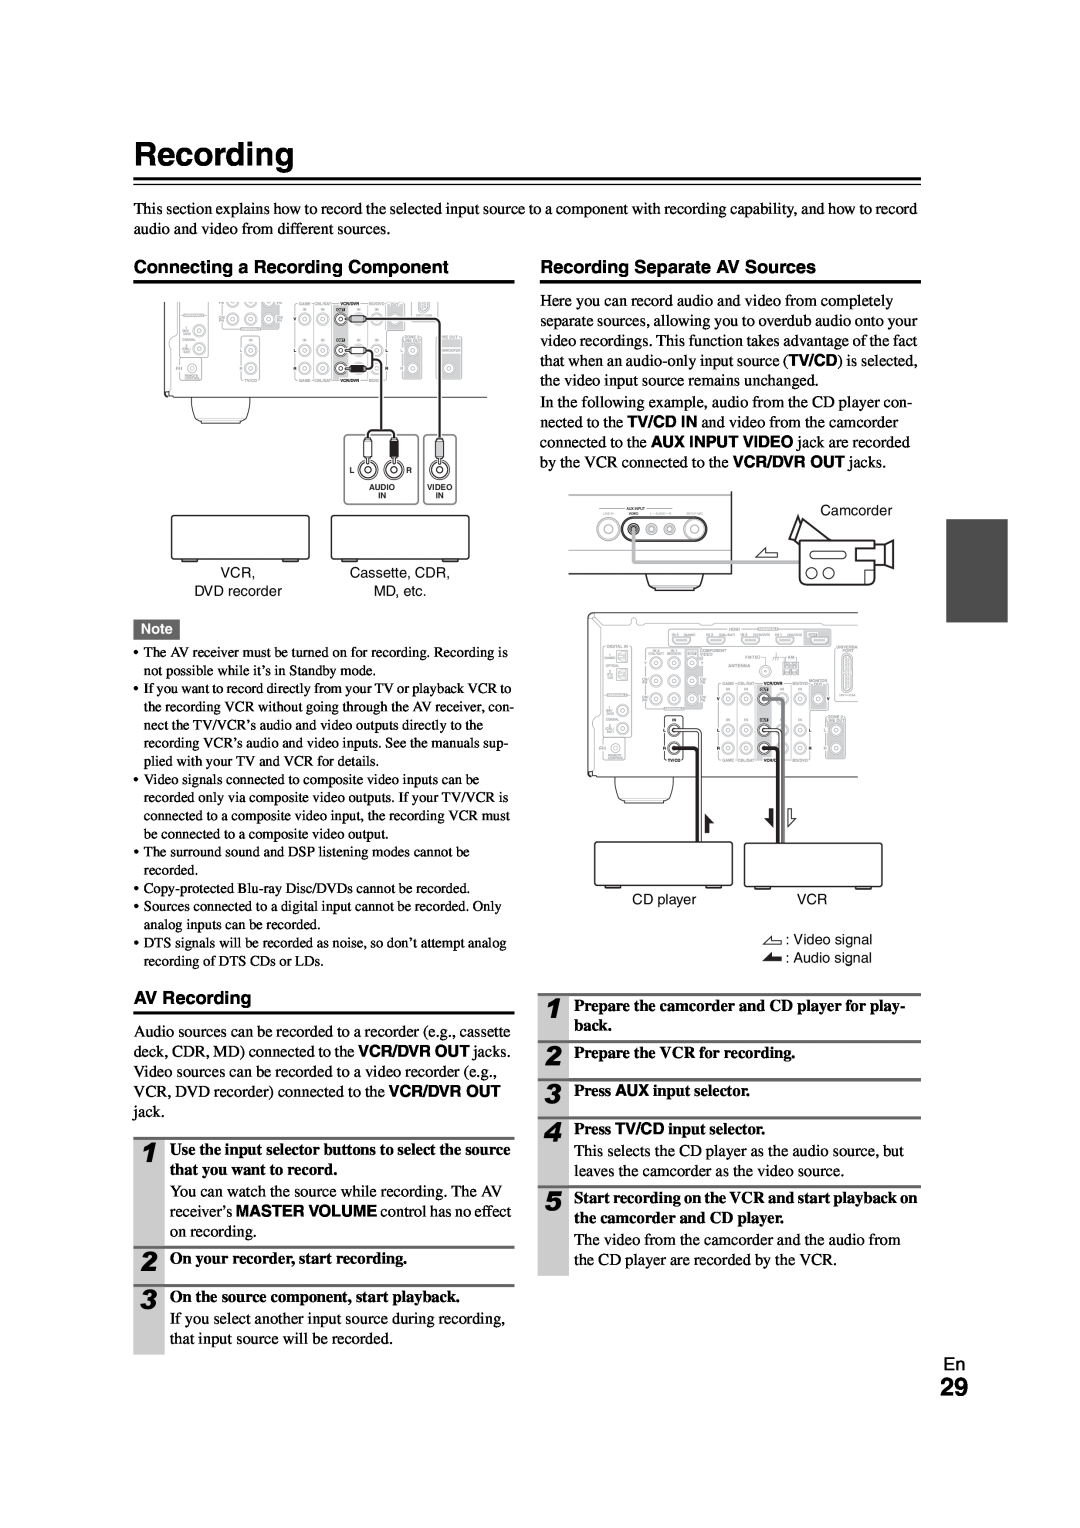 Onkyo HT-R980 instruction manual Connecting a Recording Component, Recording Separate AV Sources, AV Recording 